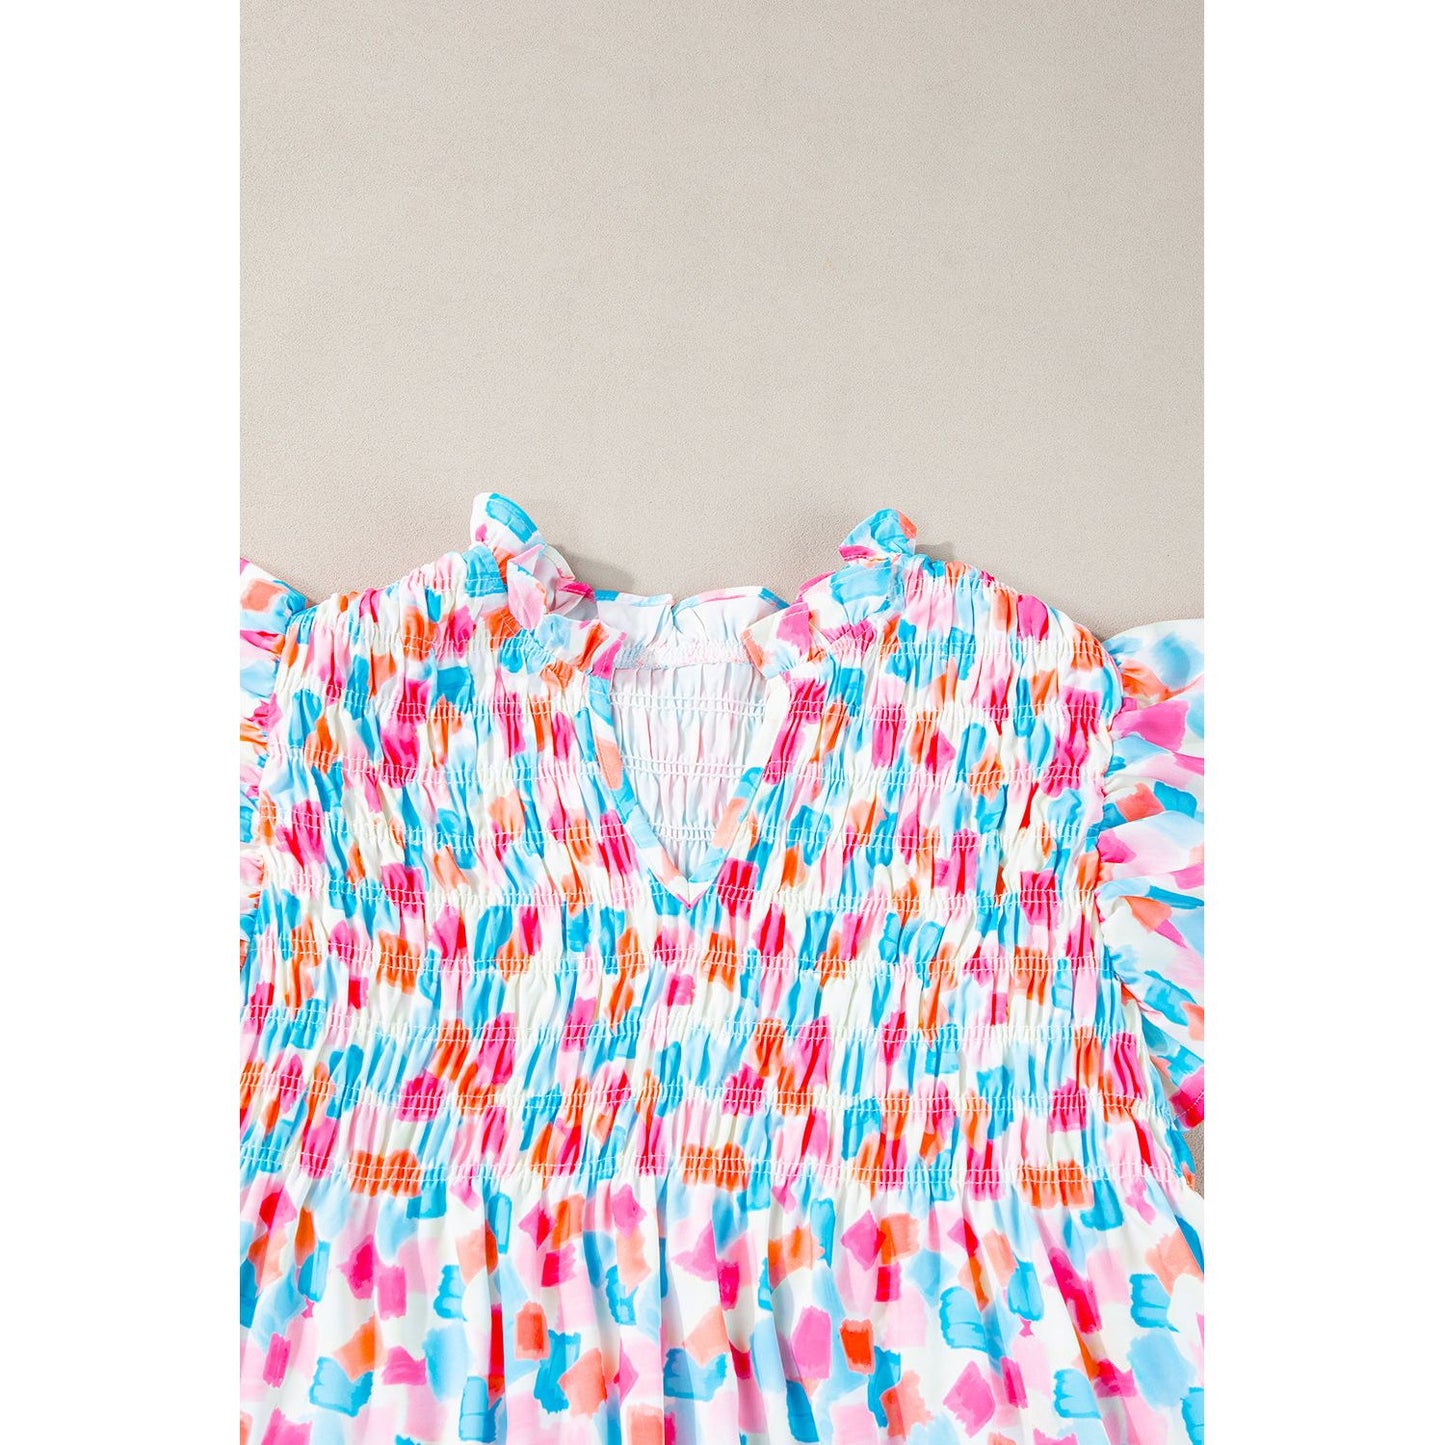 Skies Are Blue Ruffled Abstract Printed Blouse